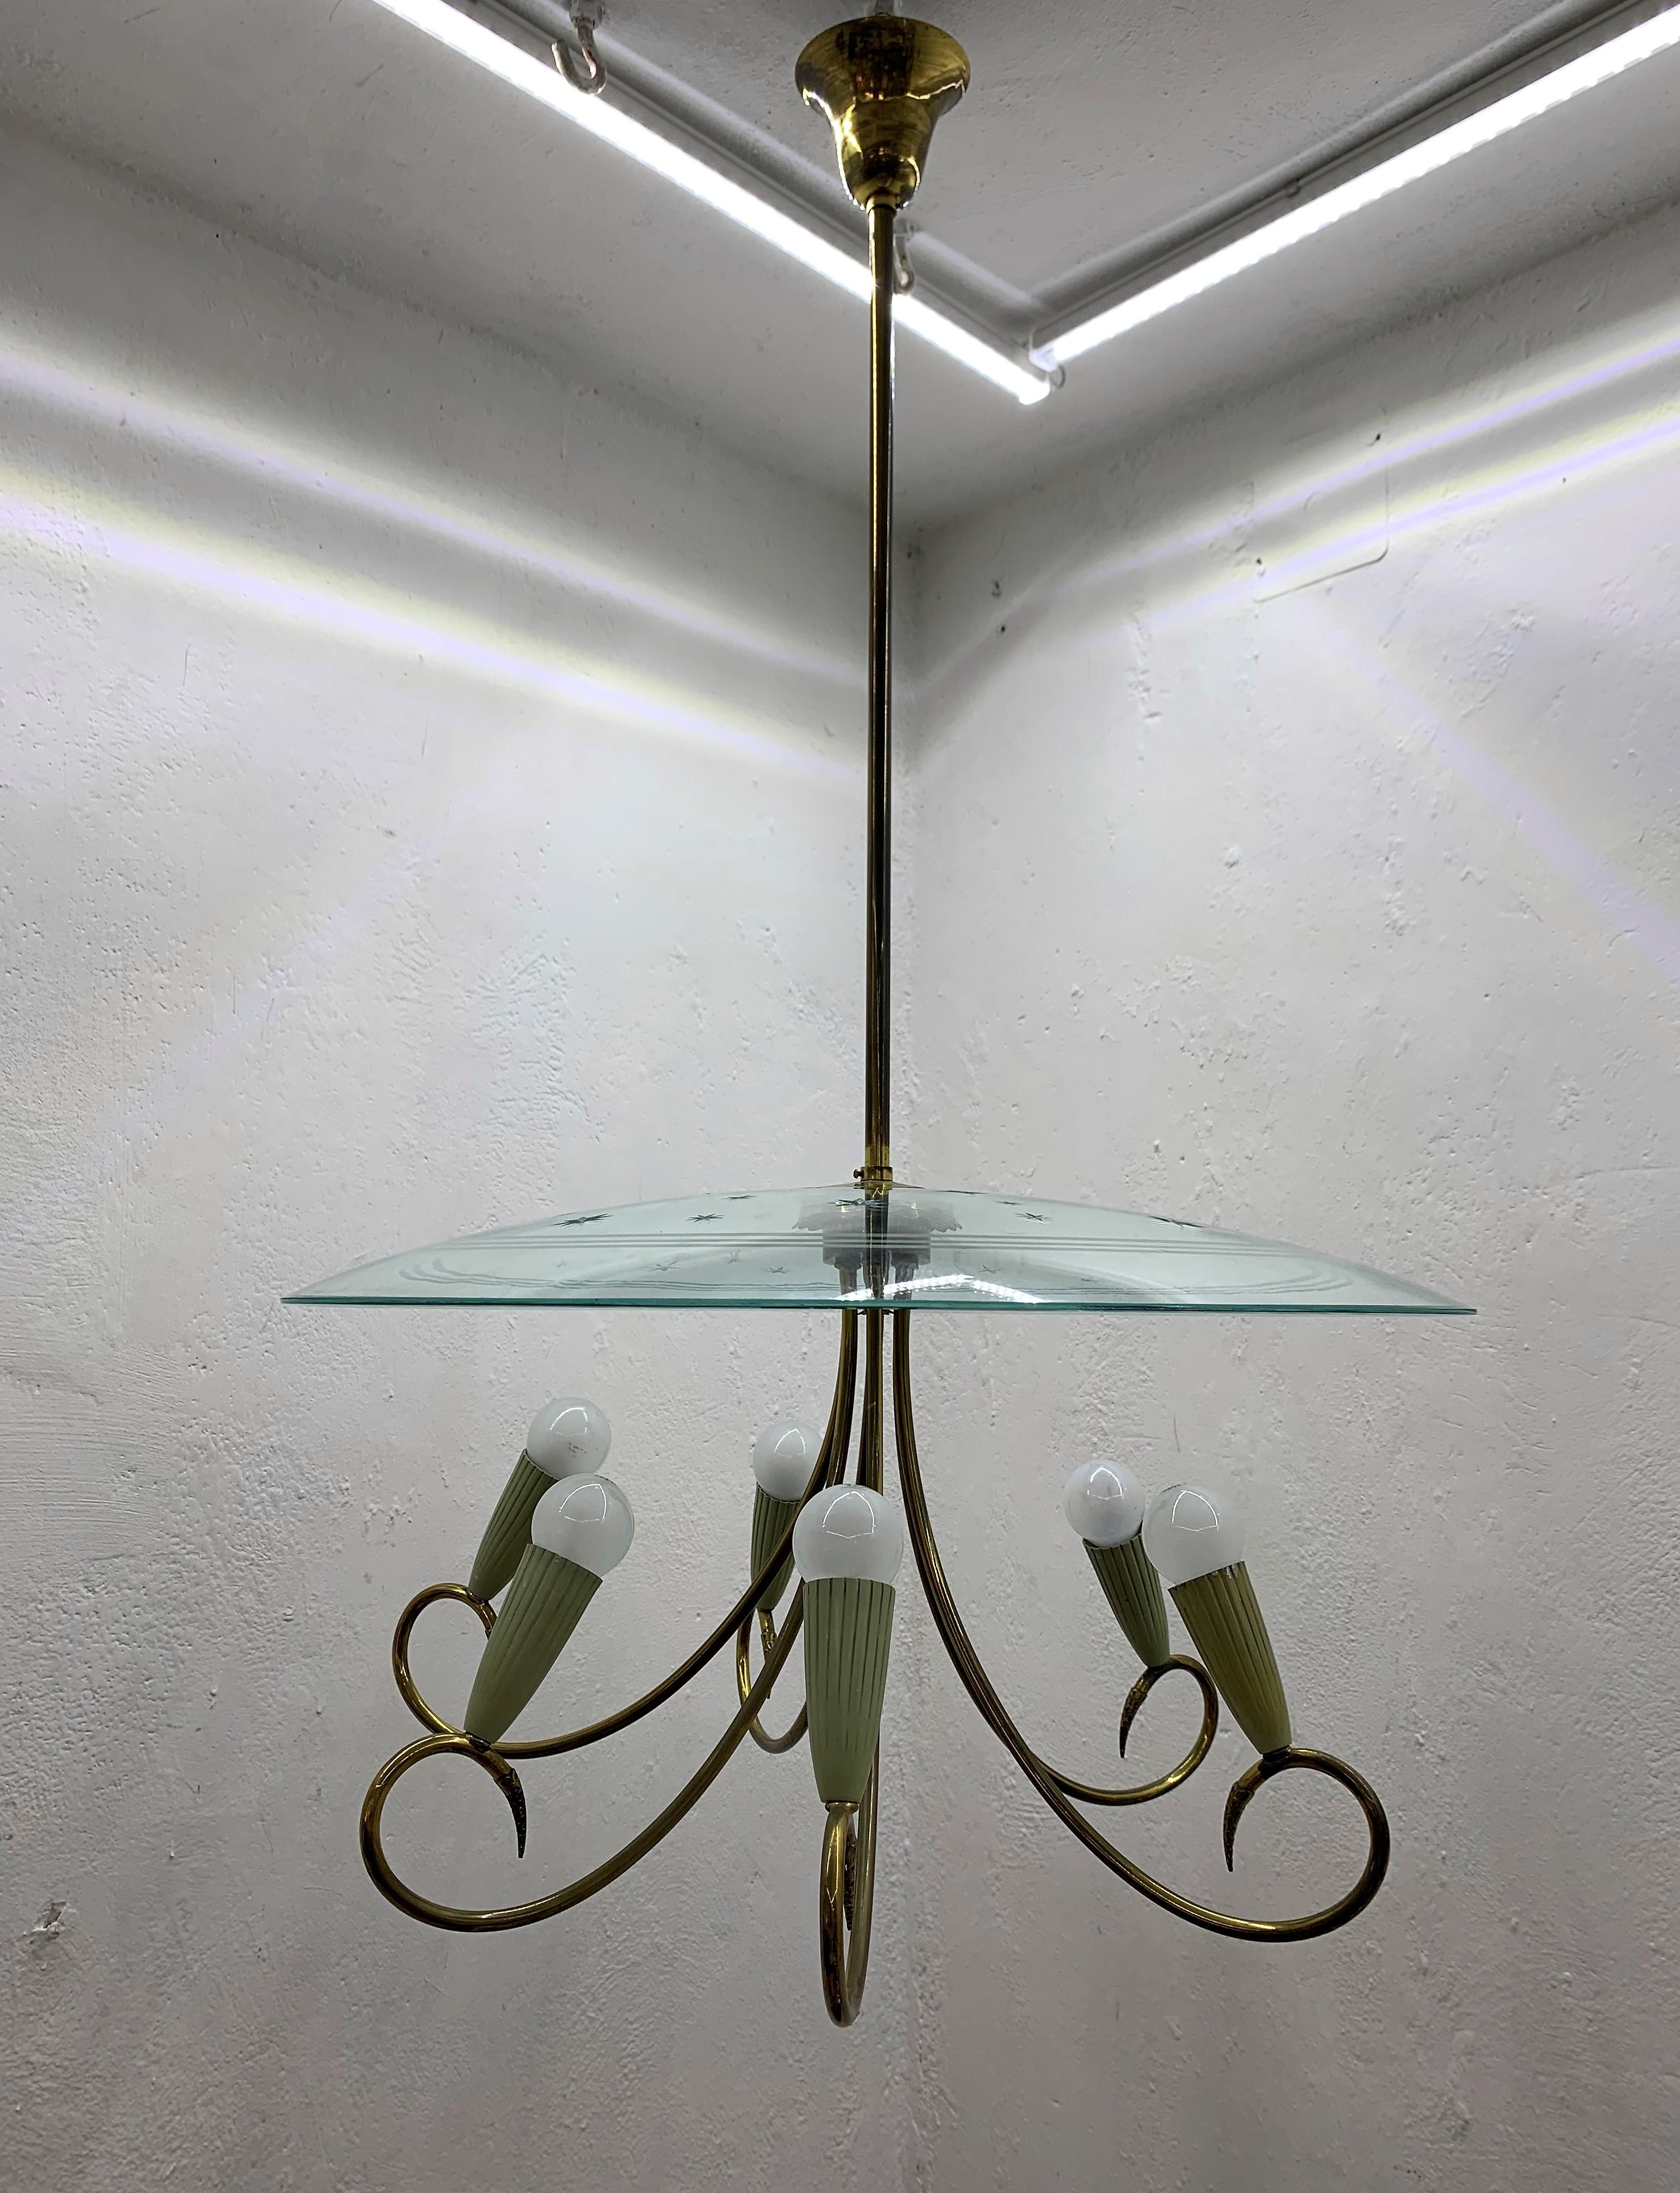 Large Mid-Century Modern six-light chandelier in the style of (attributed) to Pietro Chiesa and Fontana Arte in the shape of an UFO or Flying Saucer, in brass and carved curved glass displaying stars, Italy, 1940's.
The brass hardware has not been